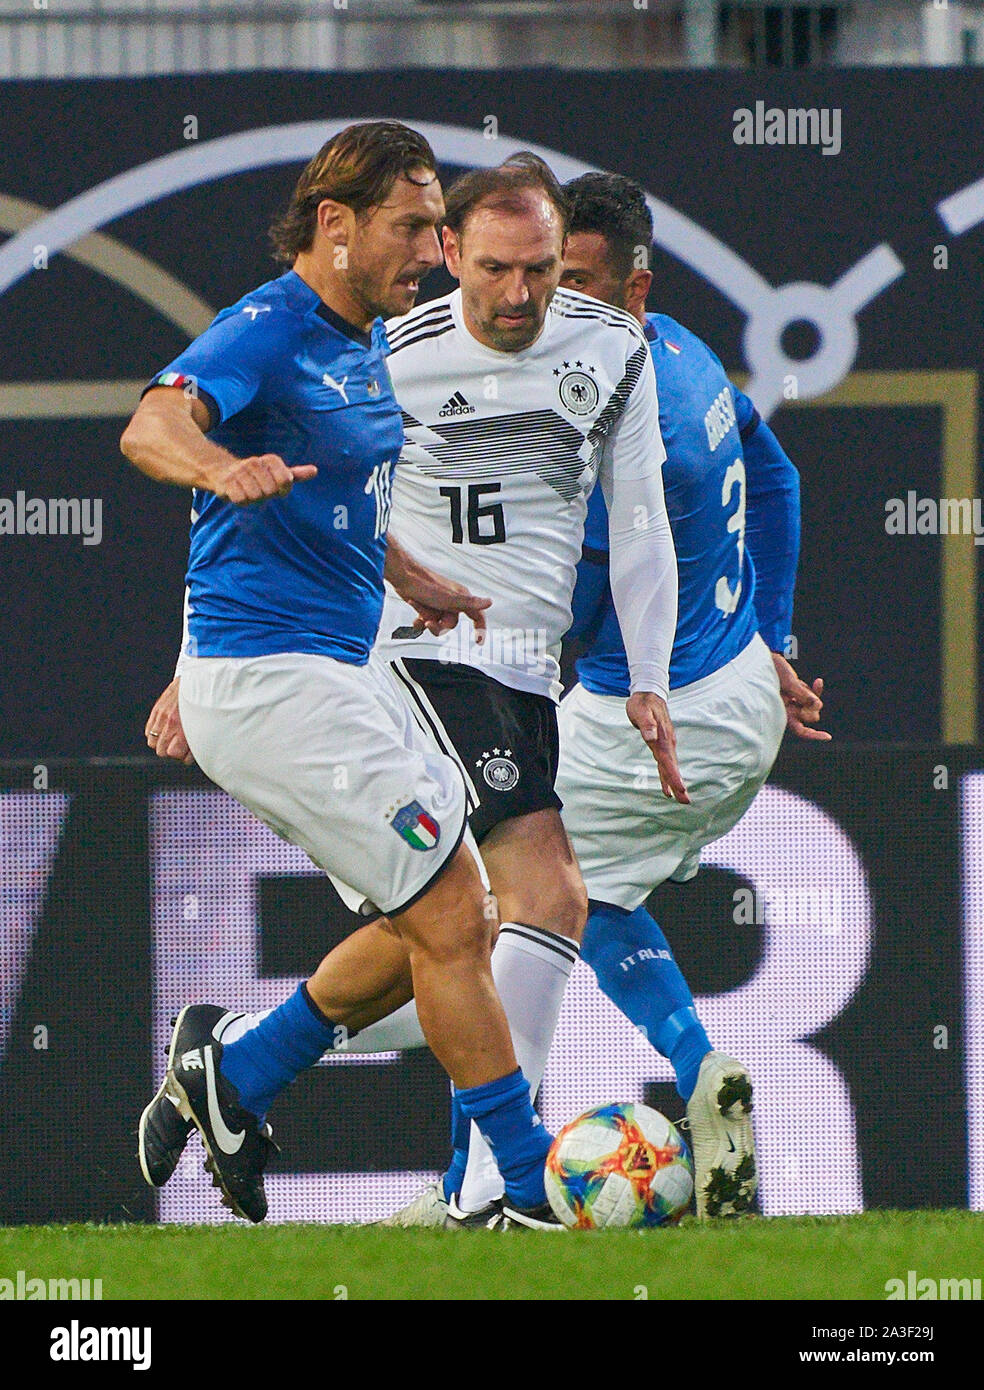 Fürth, Germany, October 07, 2019 Francesco TOTTI, ITA All Stars Nr. 10  compete for the ball, tackling, duel, header, zweikampf, action, fight against Jens NOWOTNY, DFB All Stars Nr. 16  GERMANY ALL-STARS - ITALY AZZURRI   ALL STARS 3-3, German Soccer League , Fürth, Germany,  October 07, 2019  Season 2019/2020 © Peter Schatz / Alamy Live News Stock Photo